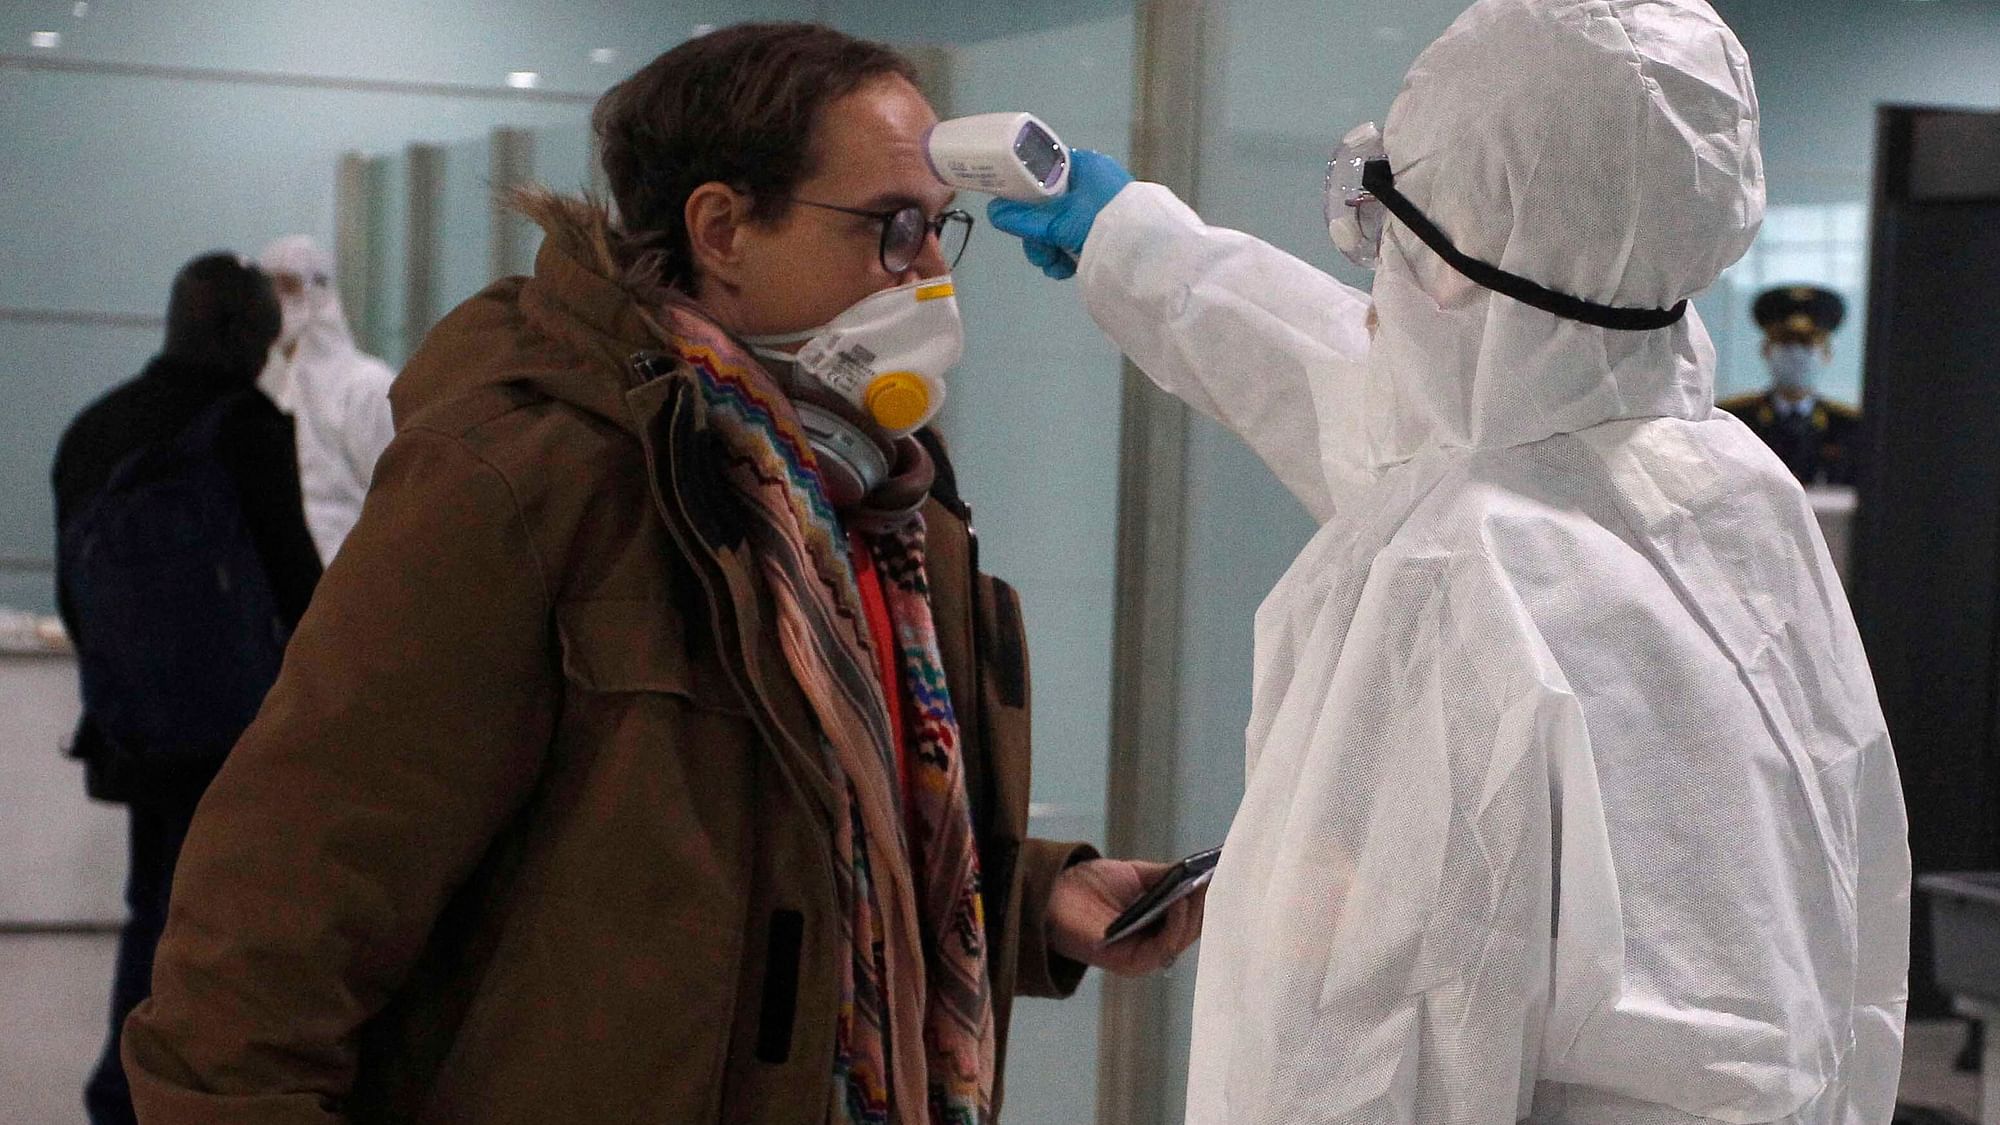 A passenger wearing a mask as a precaution against a new coronavirus has his temperature checked before boarding a flight.